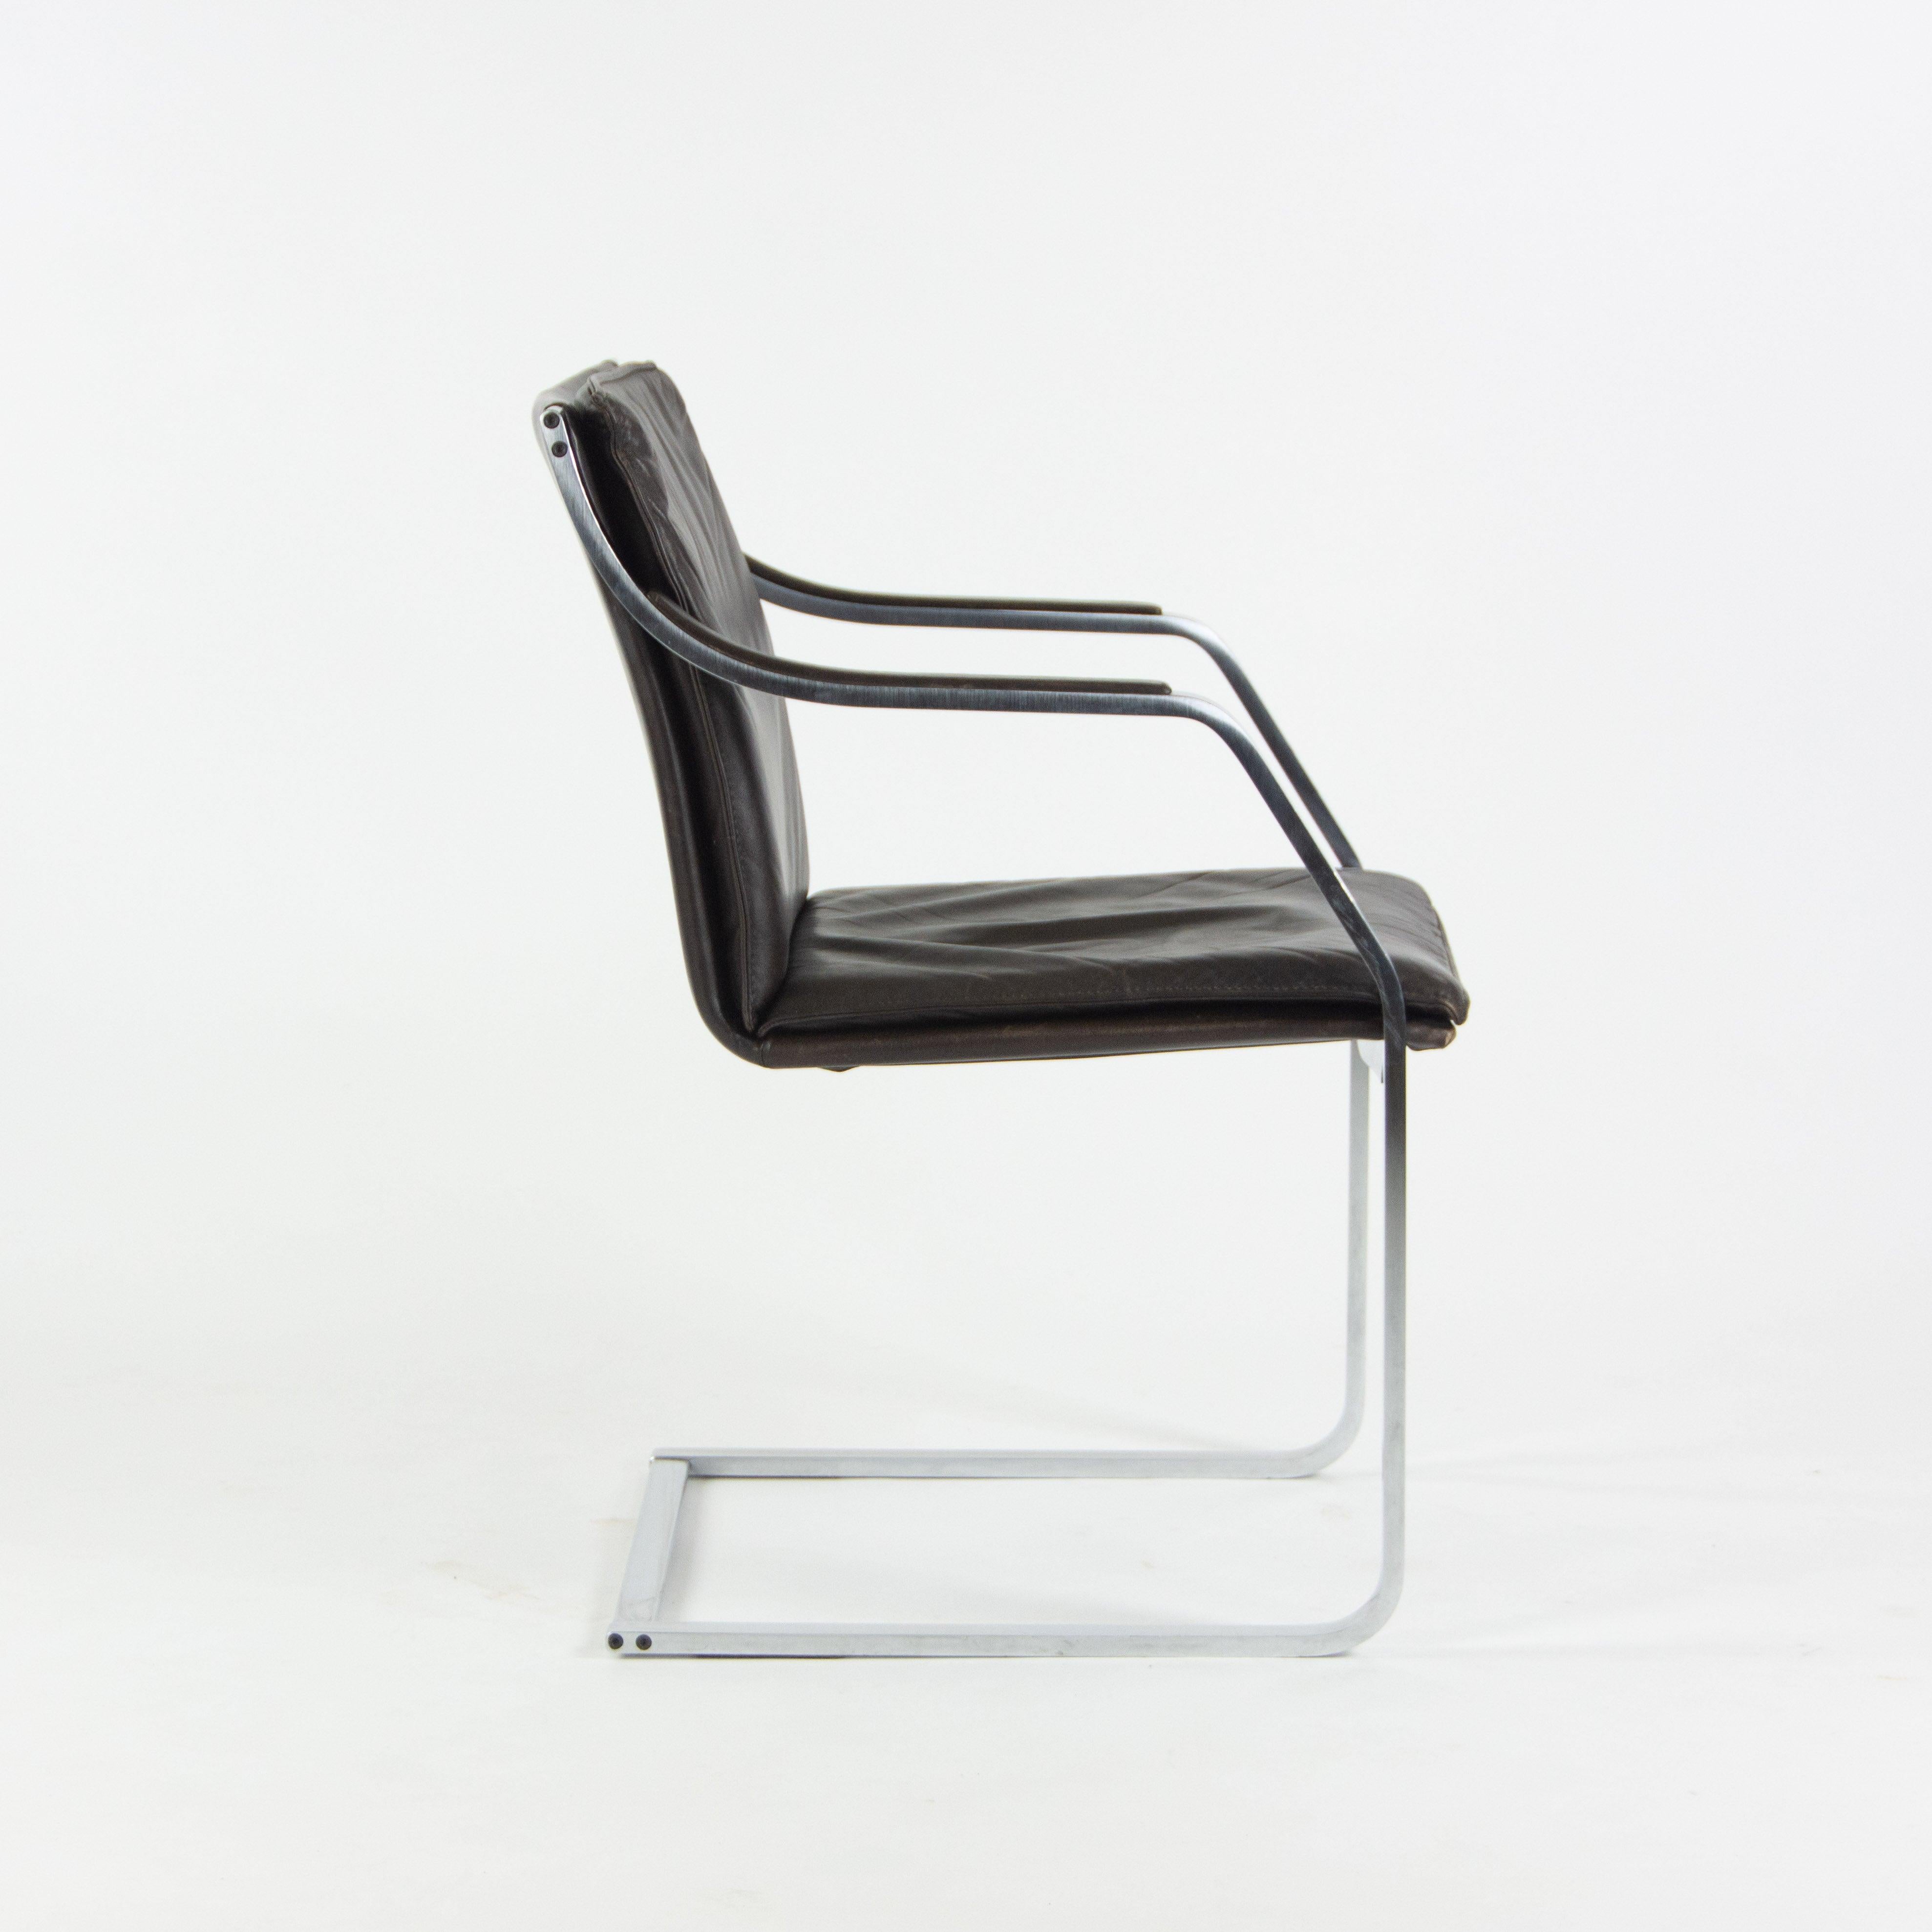 American Rudolf B. Glatzel Vintage Walter Knoll Art Collection Leather & Stainless Chair For Sale